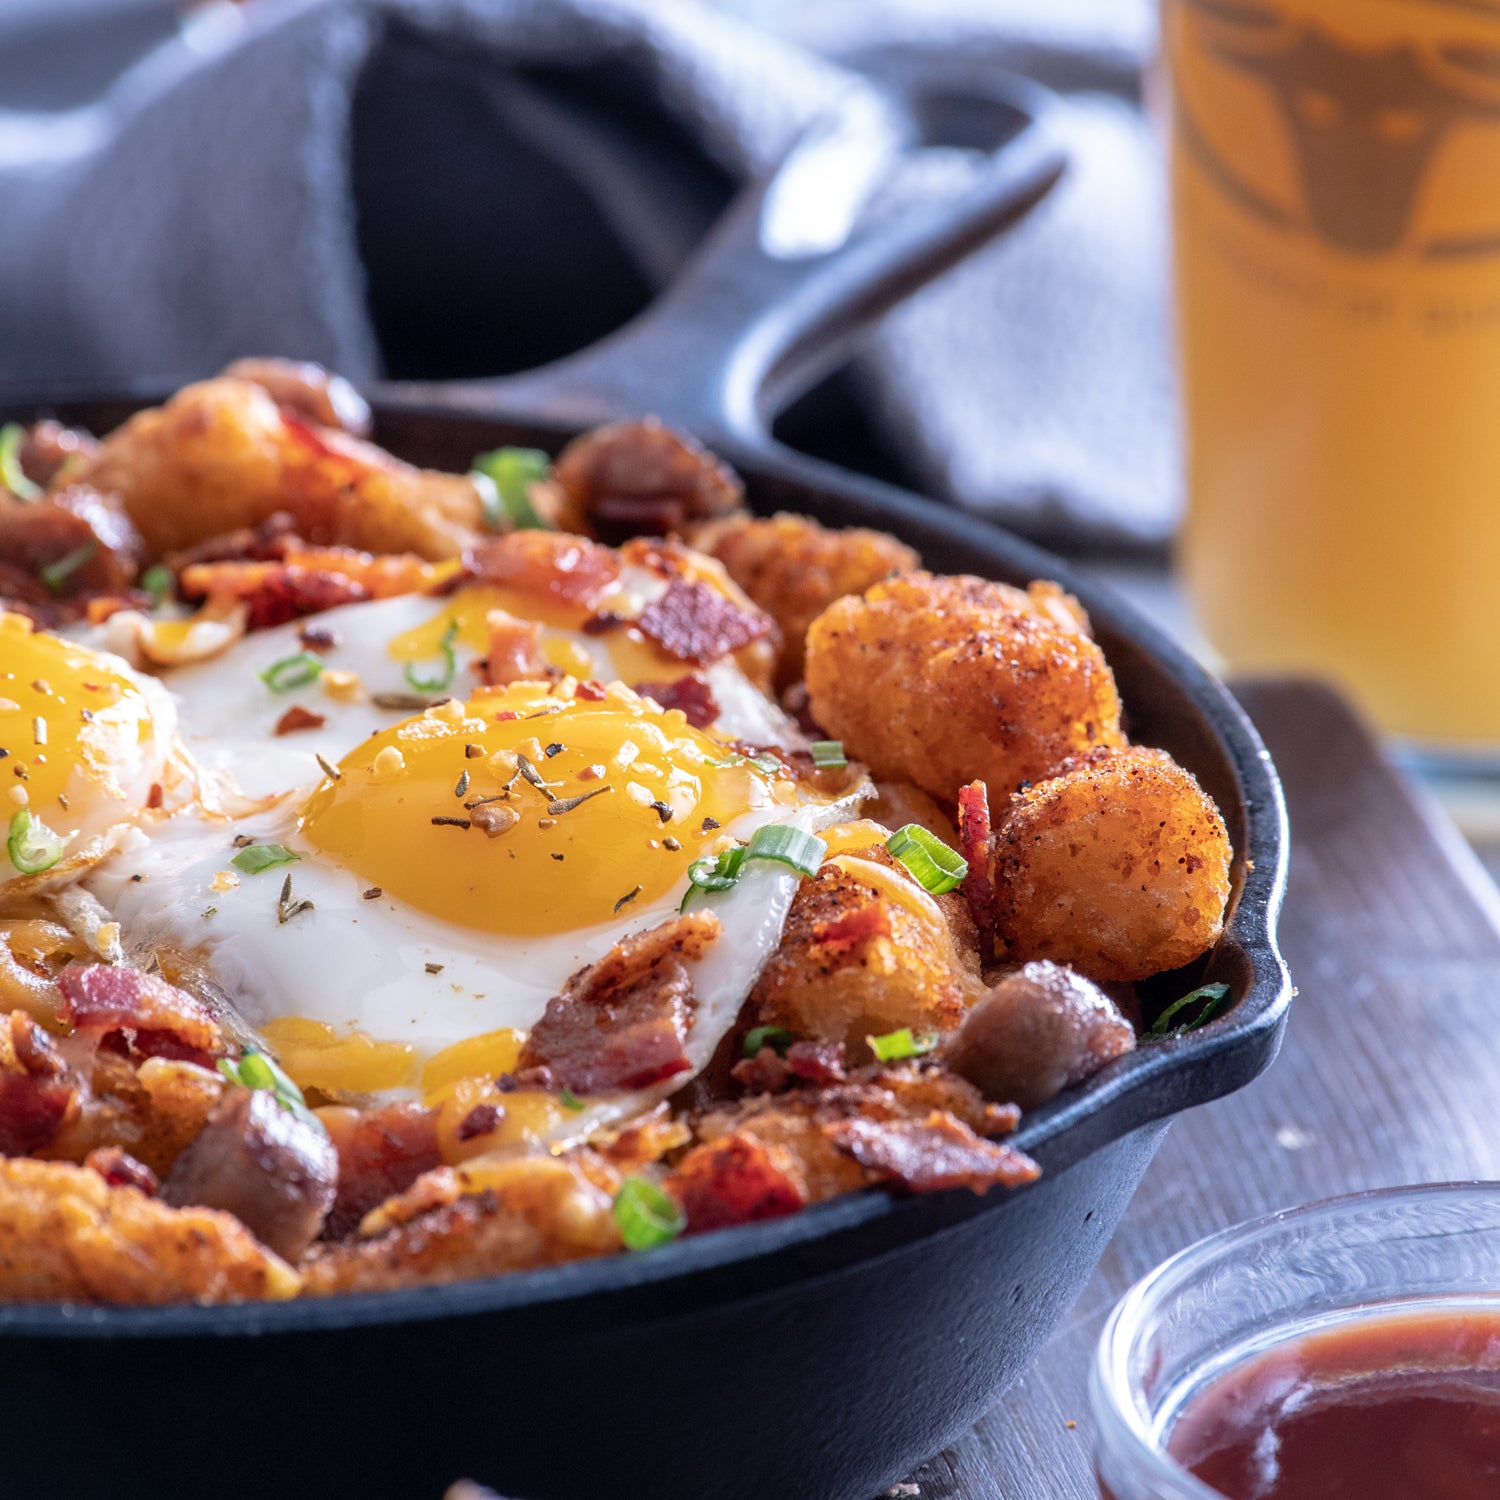 Brown Sugar Tater Tots With Bacon, Sausage & Buttery Eggs – Kinder's BBQ